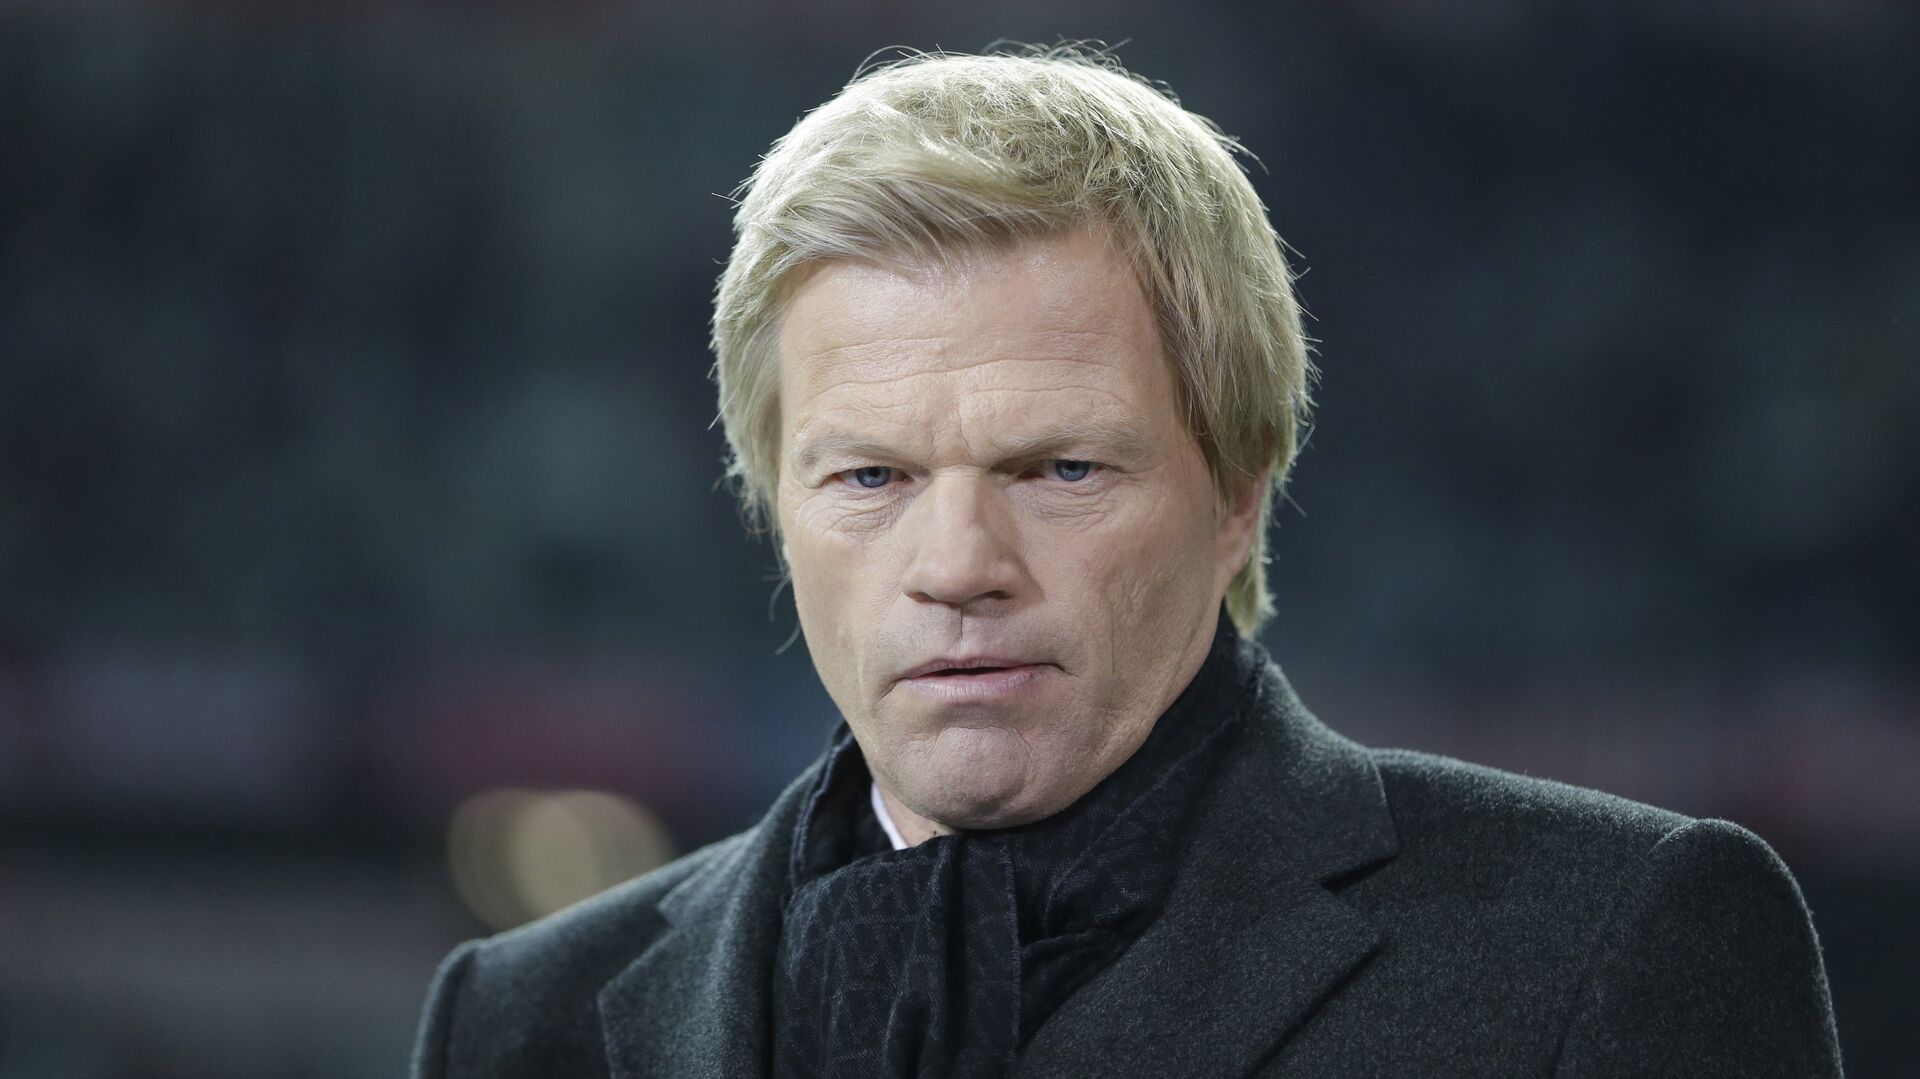 Former Bayern Munich goalkeeper and TV sports moderator Oliver Kahn is waiting for an interview prior to the soccer Champions League group F match between FC Bayern Munich and OSC Lille in Munich, Germany, Wednesday, Nov. 7, 2012 - اسپوتنیک افغانستان  , 1920, 26.08.2022